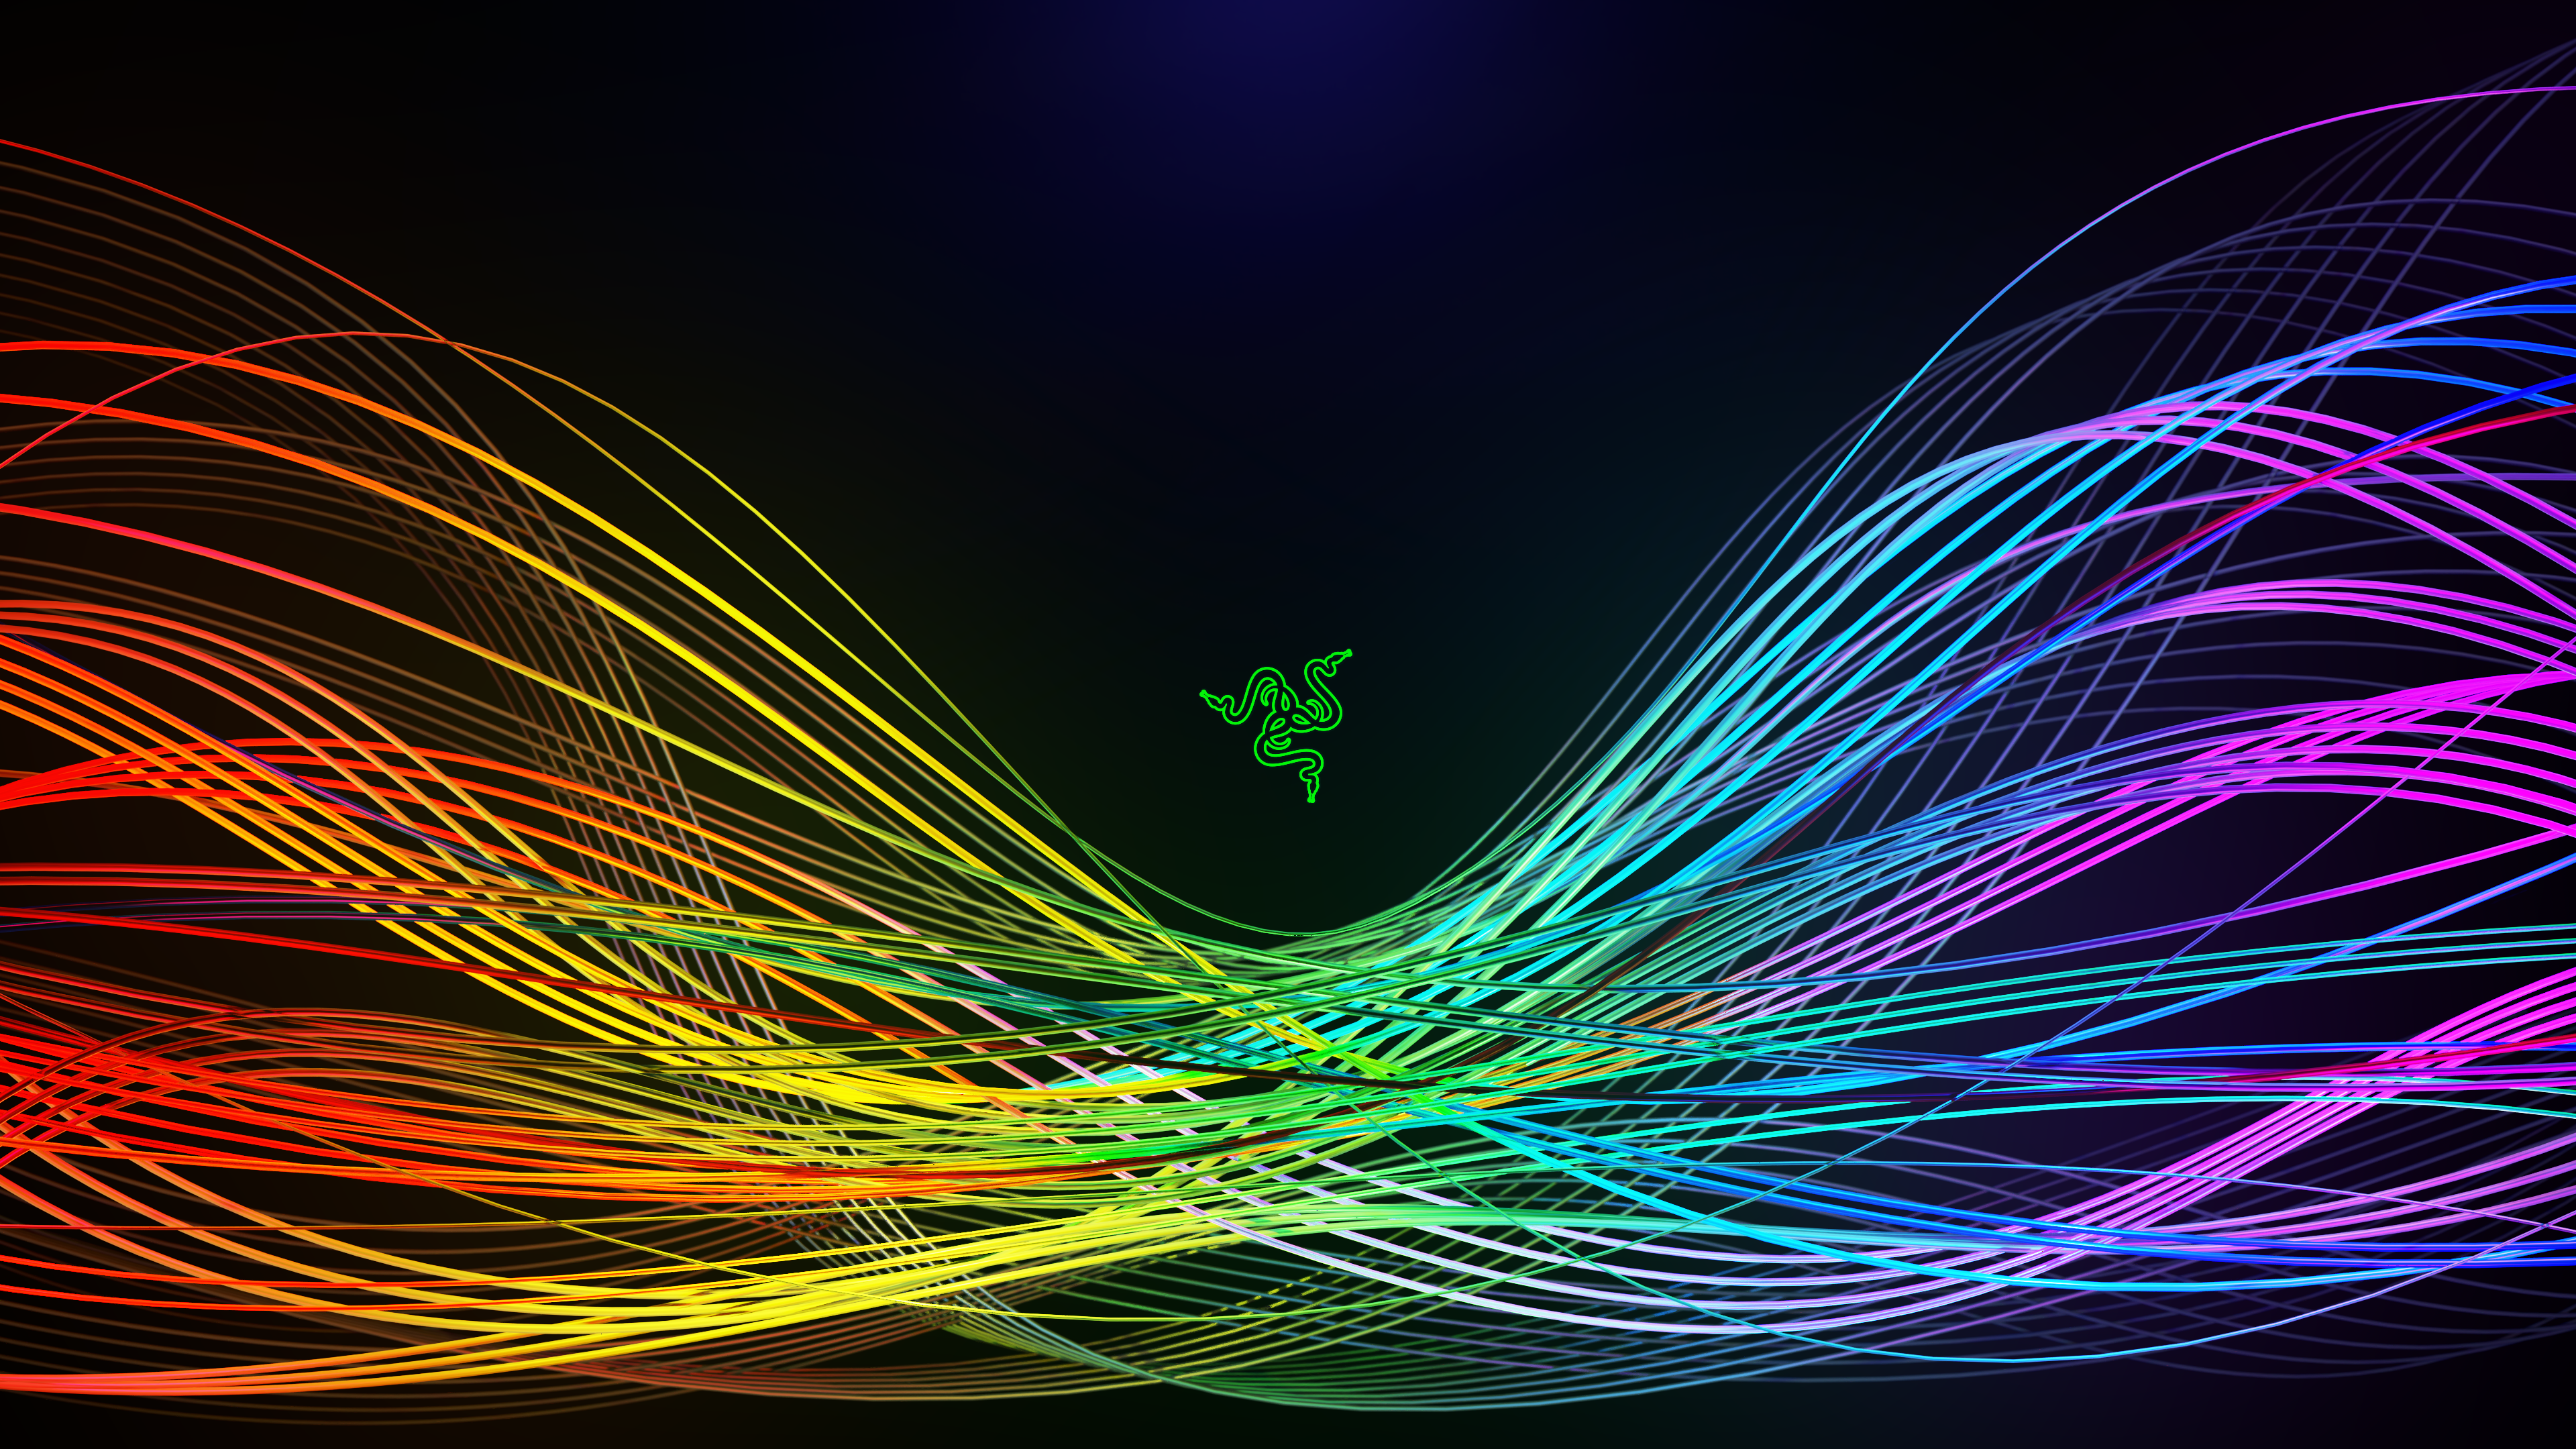 Razer Animated Wallpapers - Wallpaper Cave